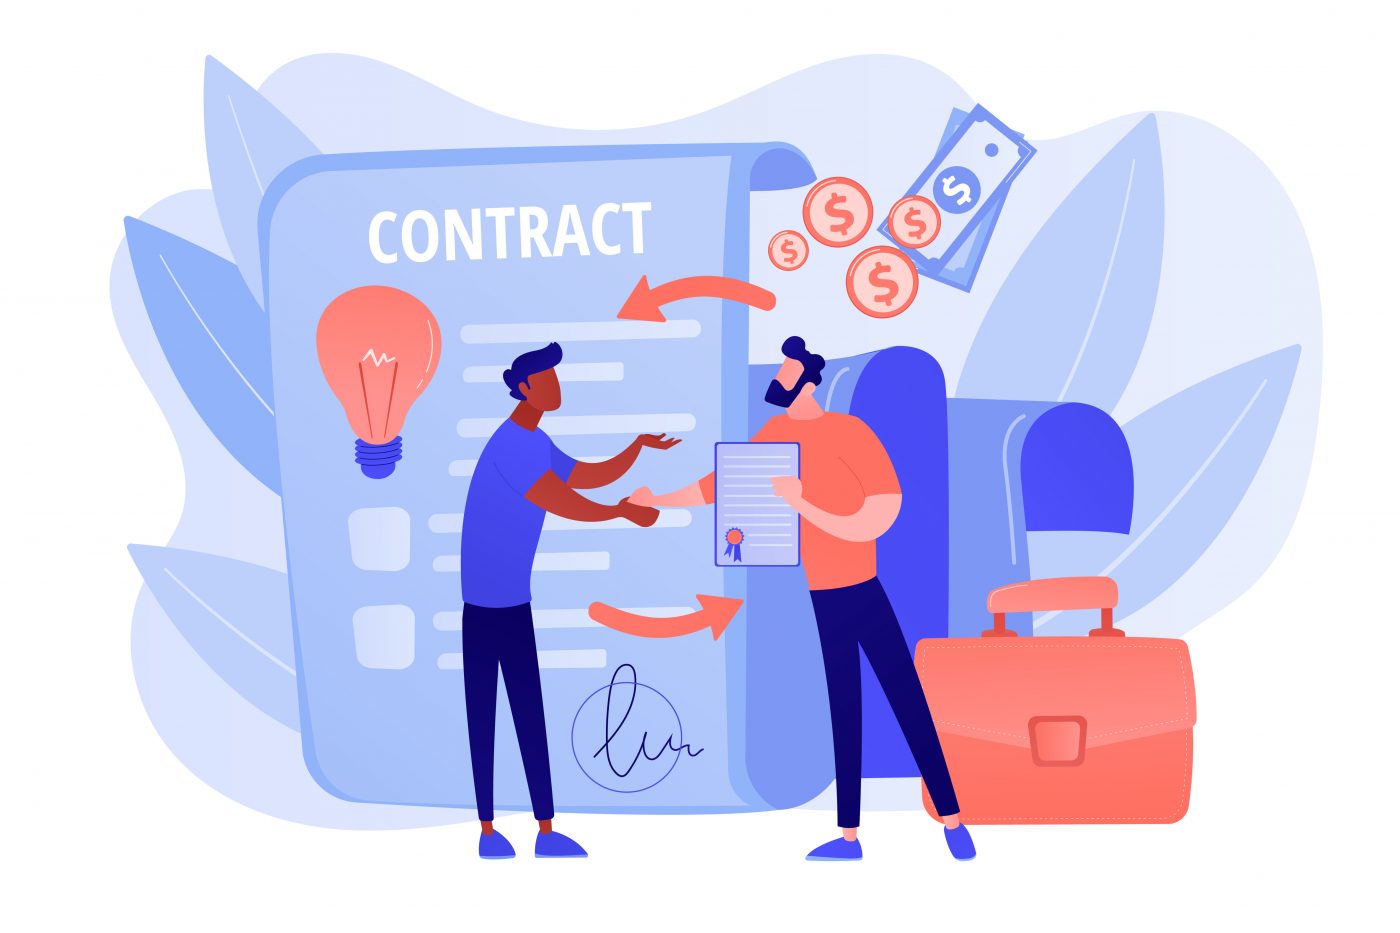 Visual contracts